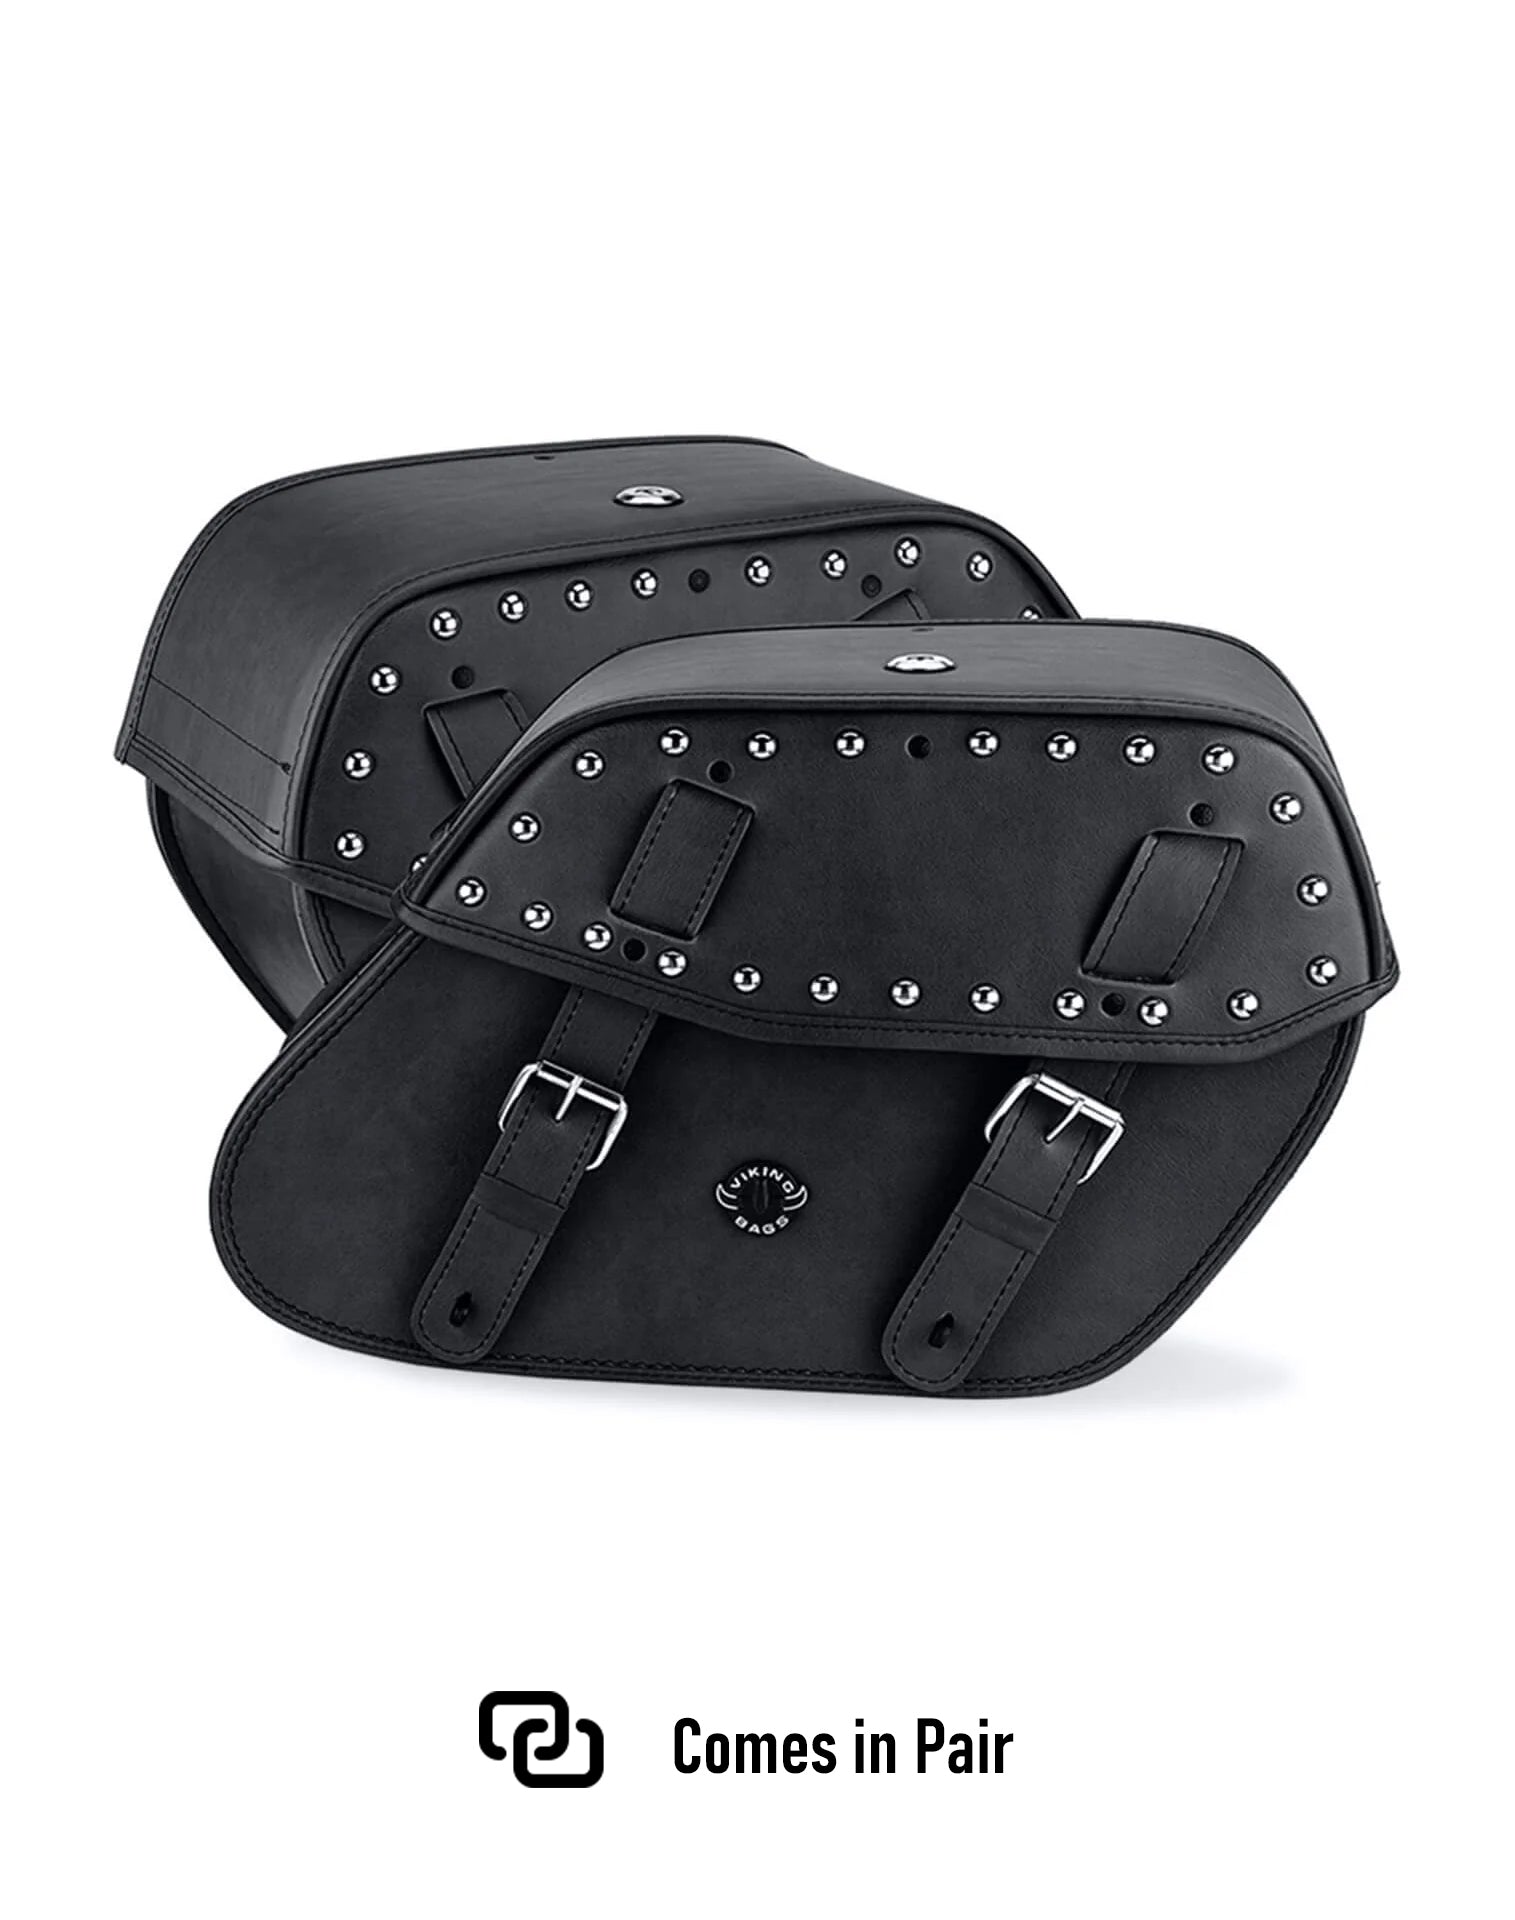 Viking Odin Large Studded Leather Motorcycle Saddlebags For Harley Softail Fatboy Flstf I Weather Resistant Bags Comes in Pair